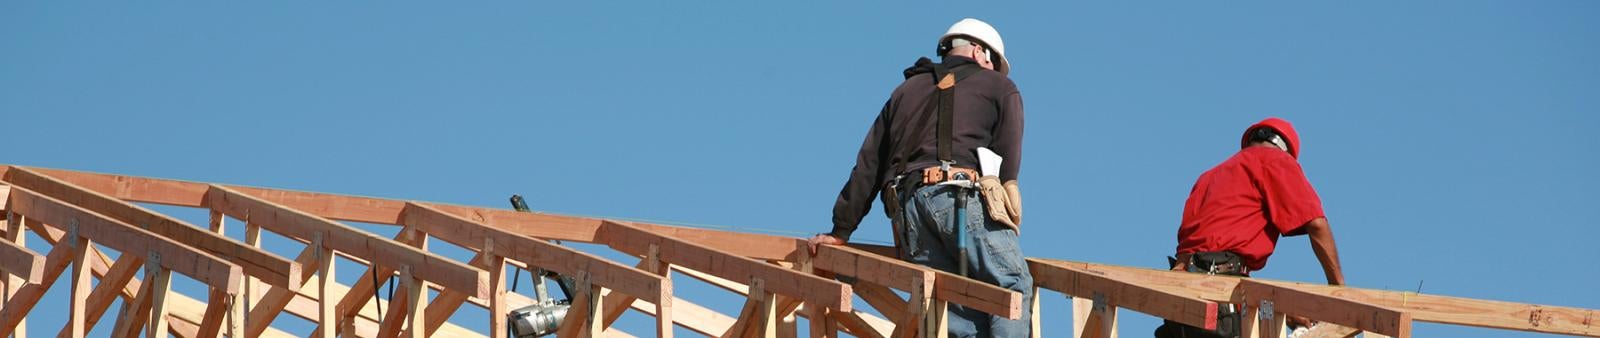 Carpentry and Construction Trades Banner Image